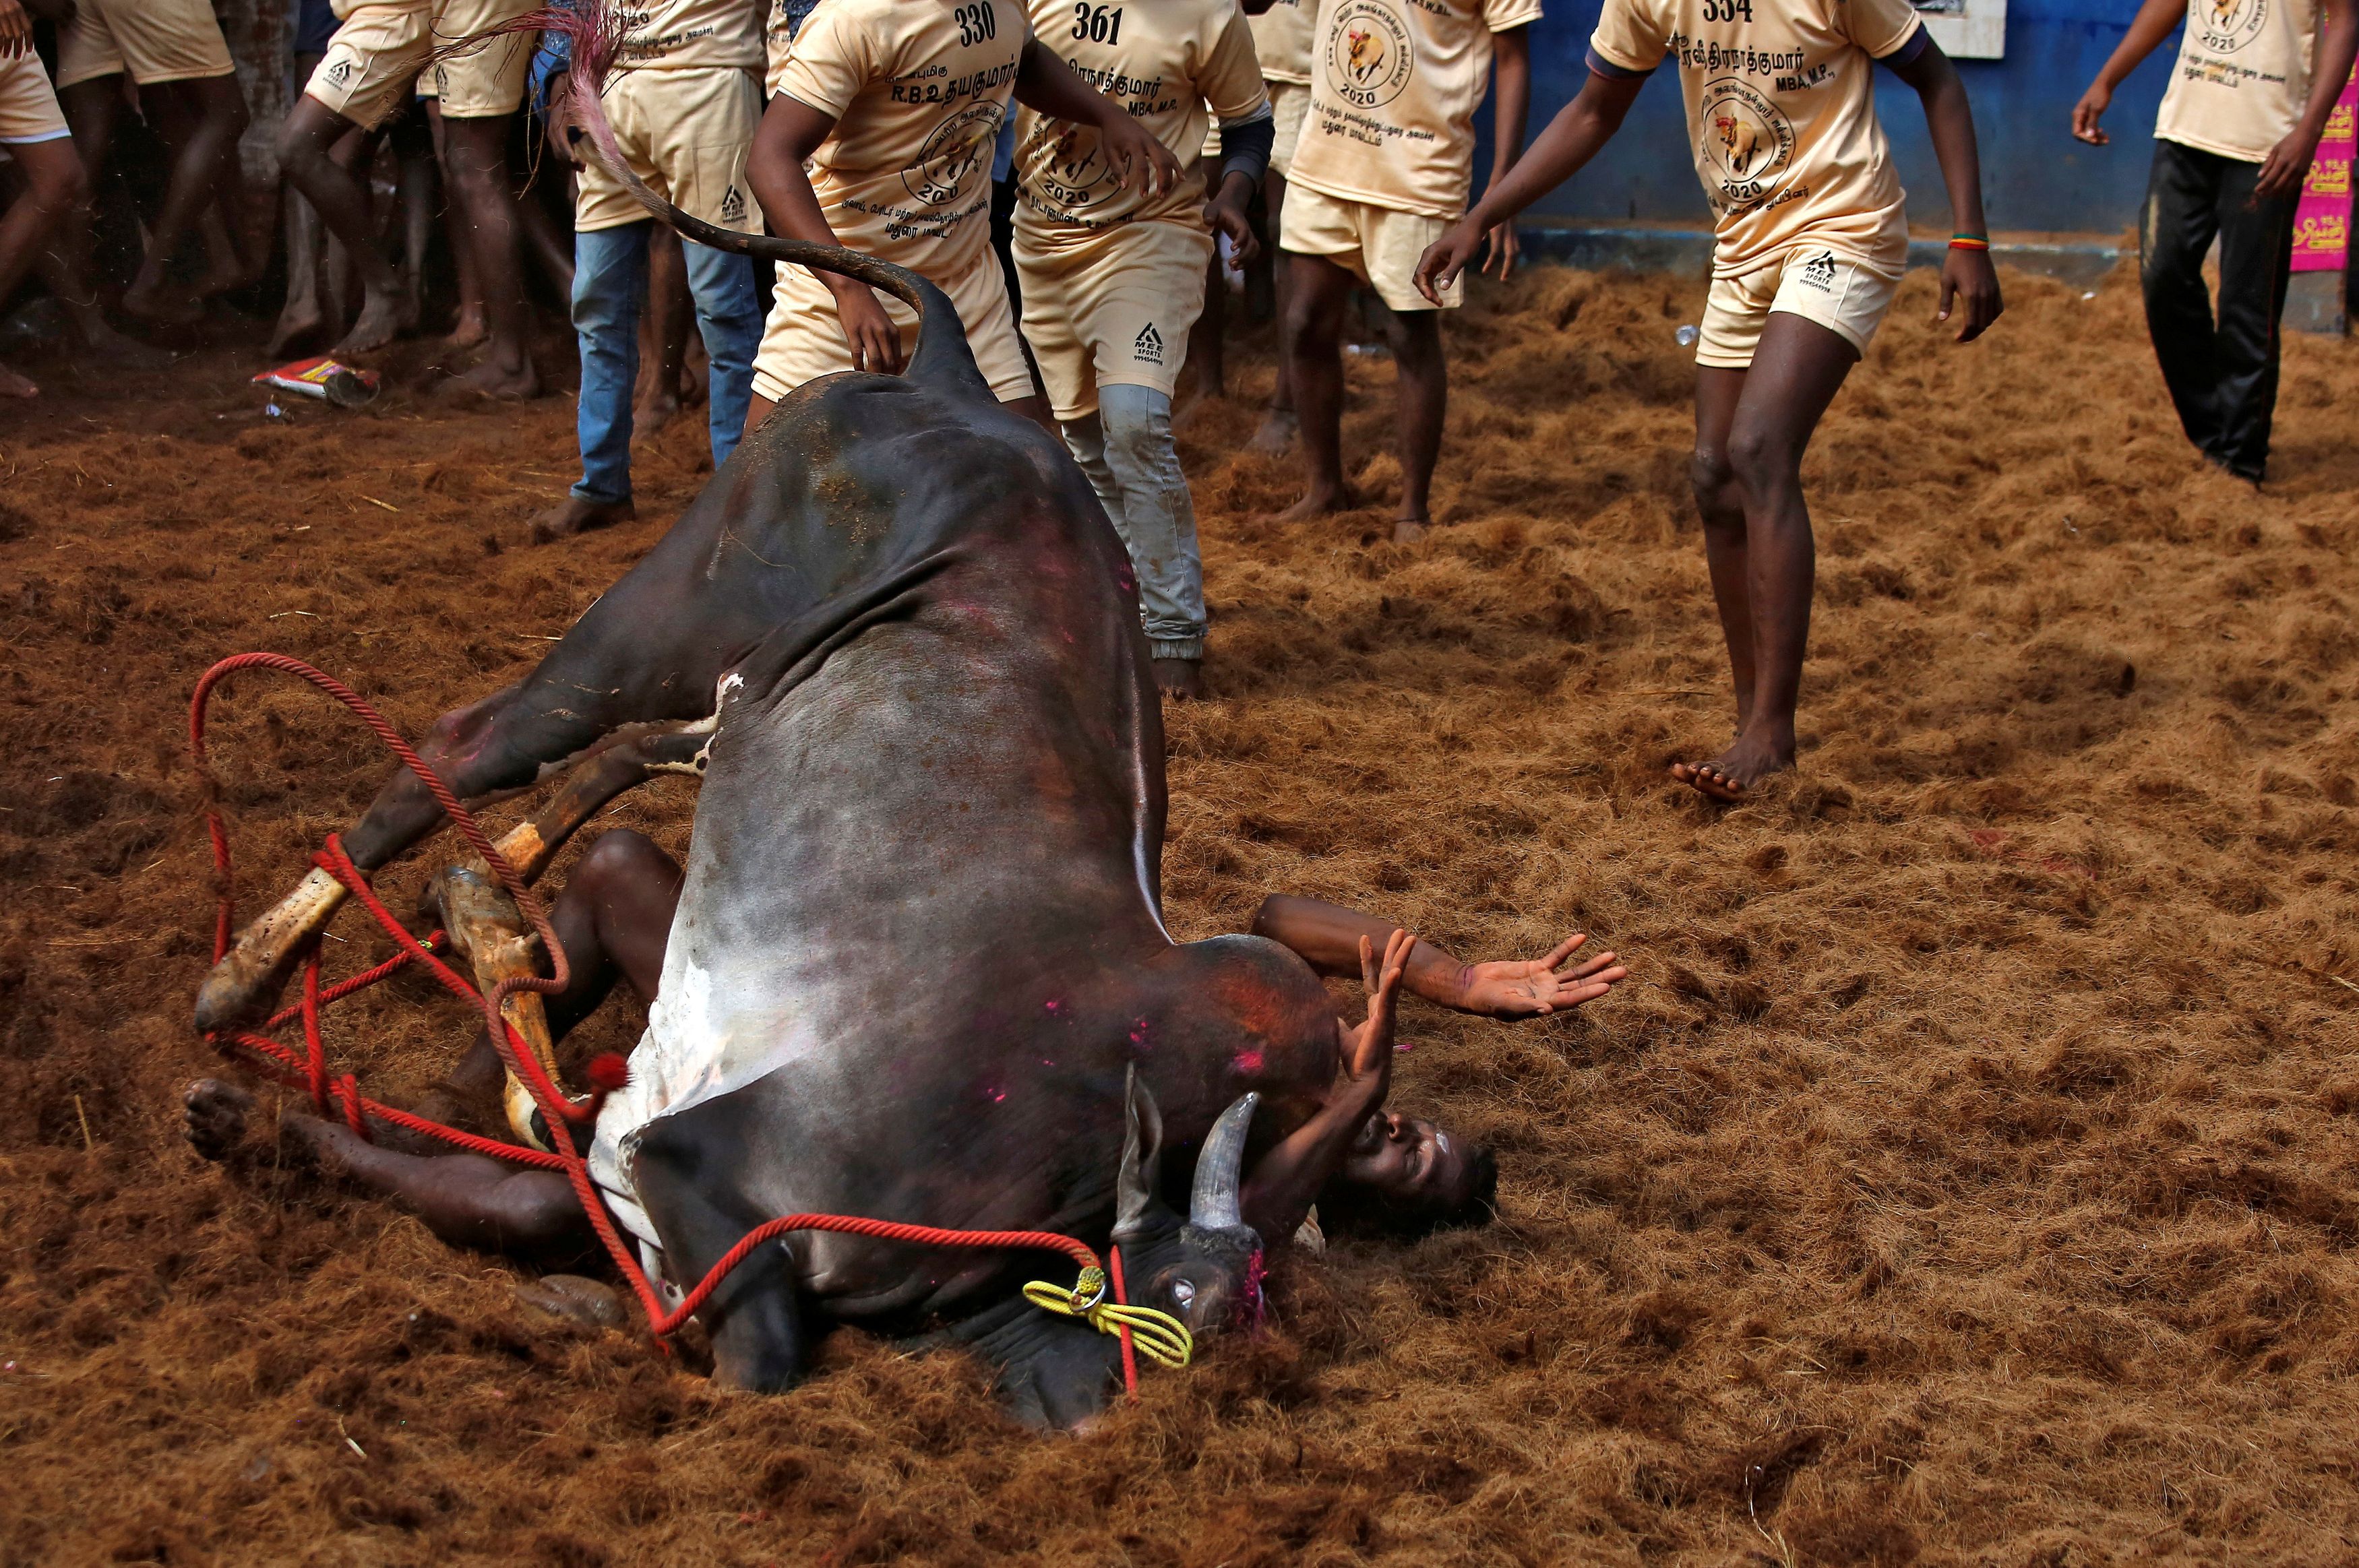 A villager reacts as he lies under a bull as villagers rush to rescue him during a bull-taming festival, part of south India's harvest festival of Pongal, on the outskirts of Madurai town, Tamil Nadu state, India January 17, 2020. REUTERS/P. Ravikumar TPX IMAGES OF THE DAY